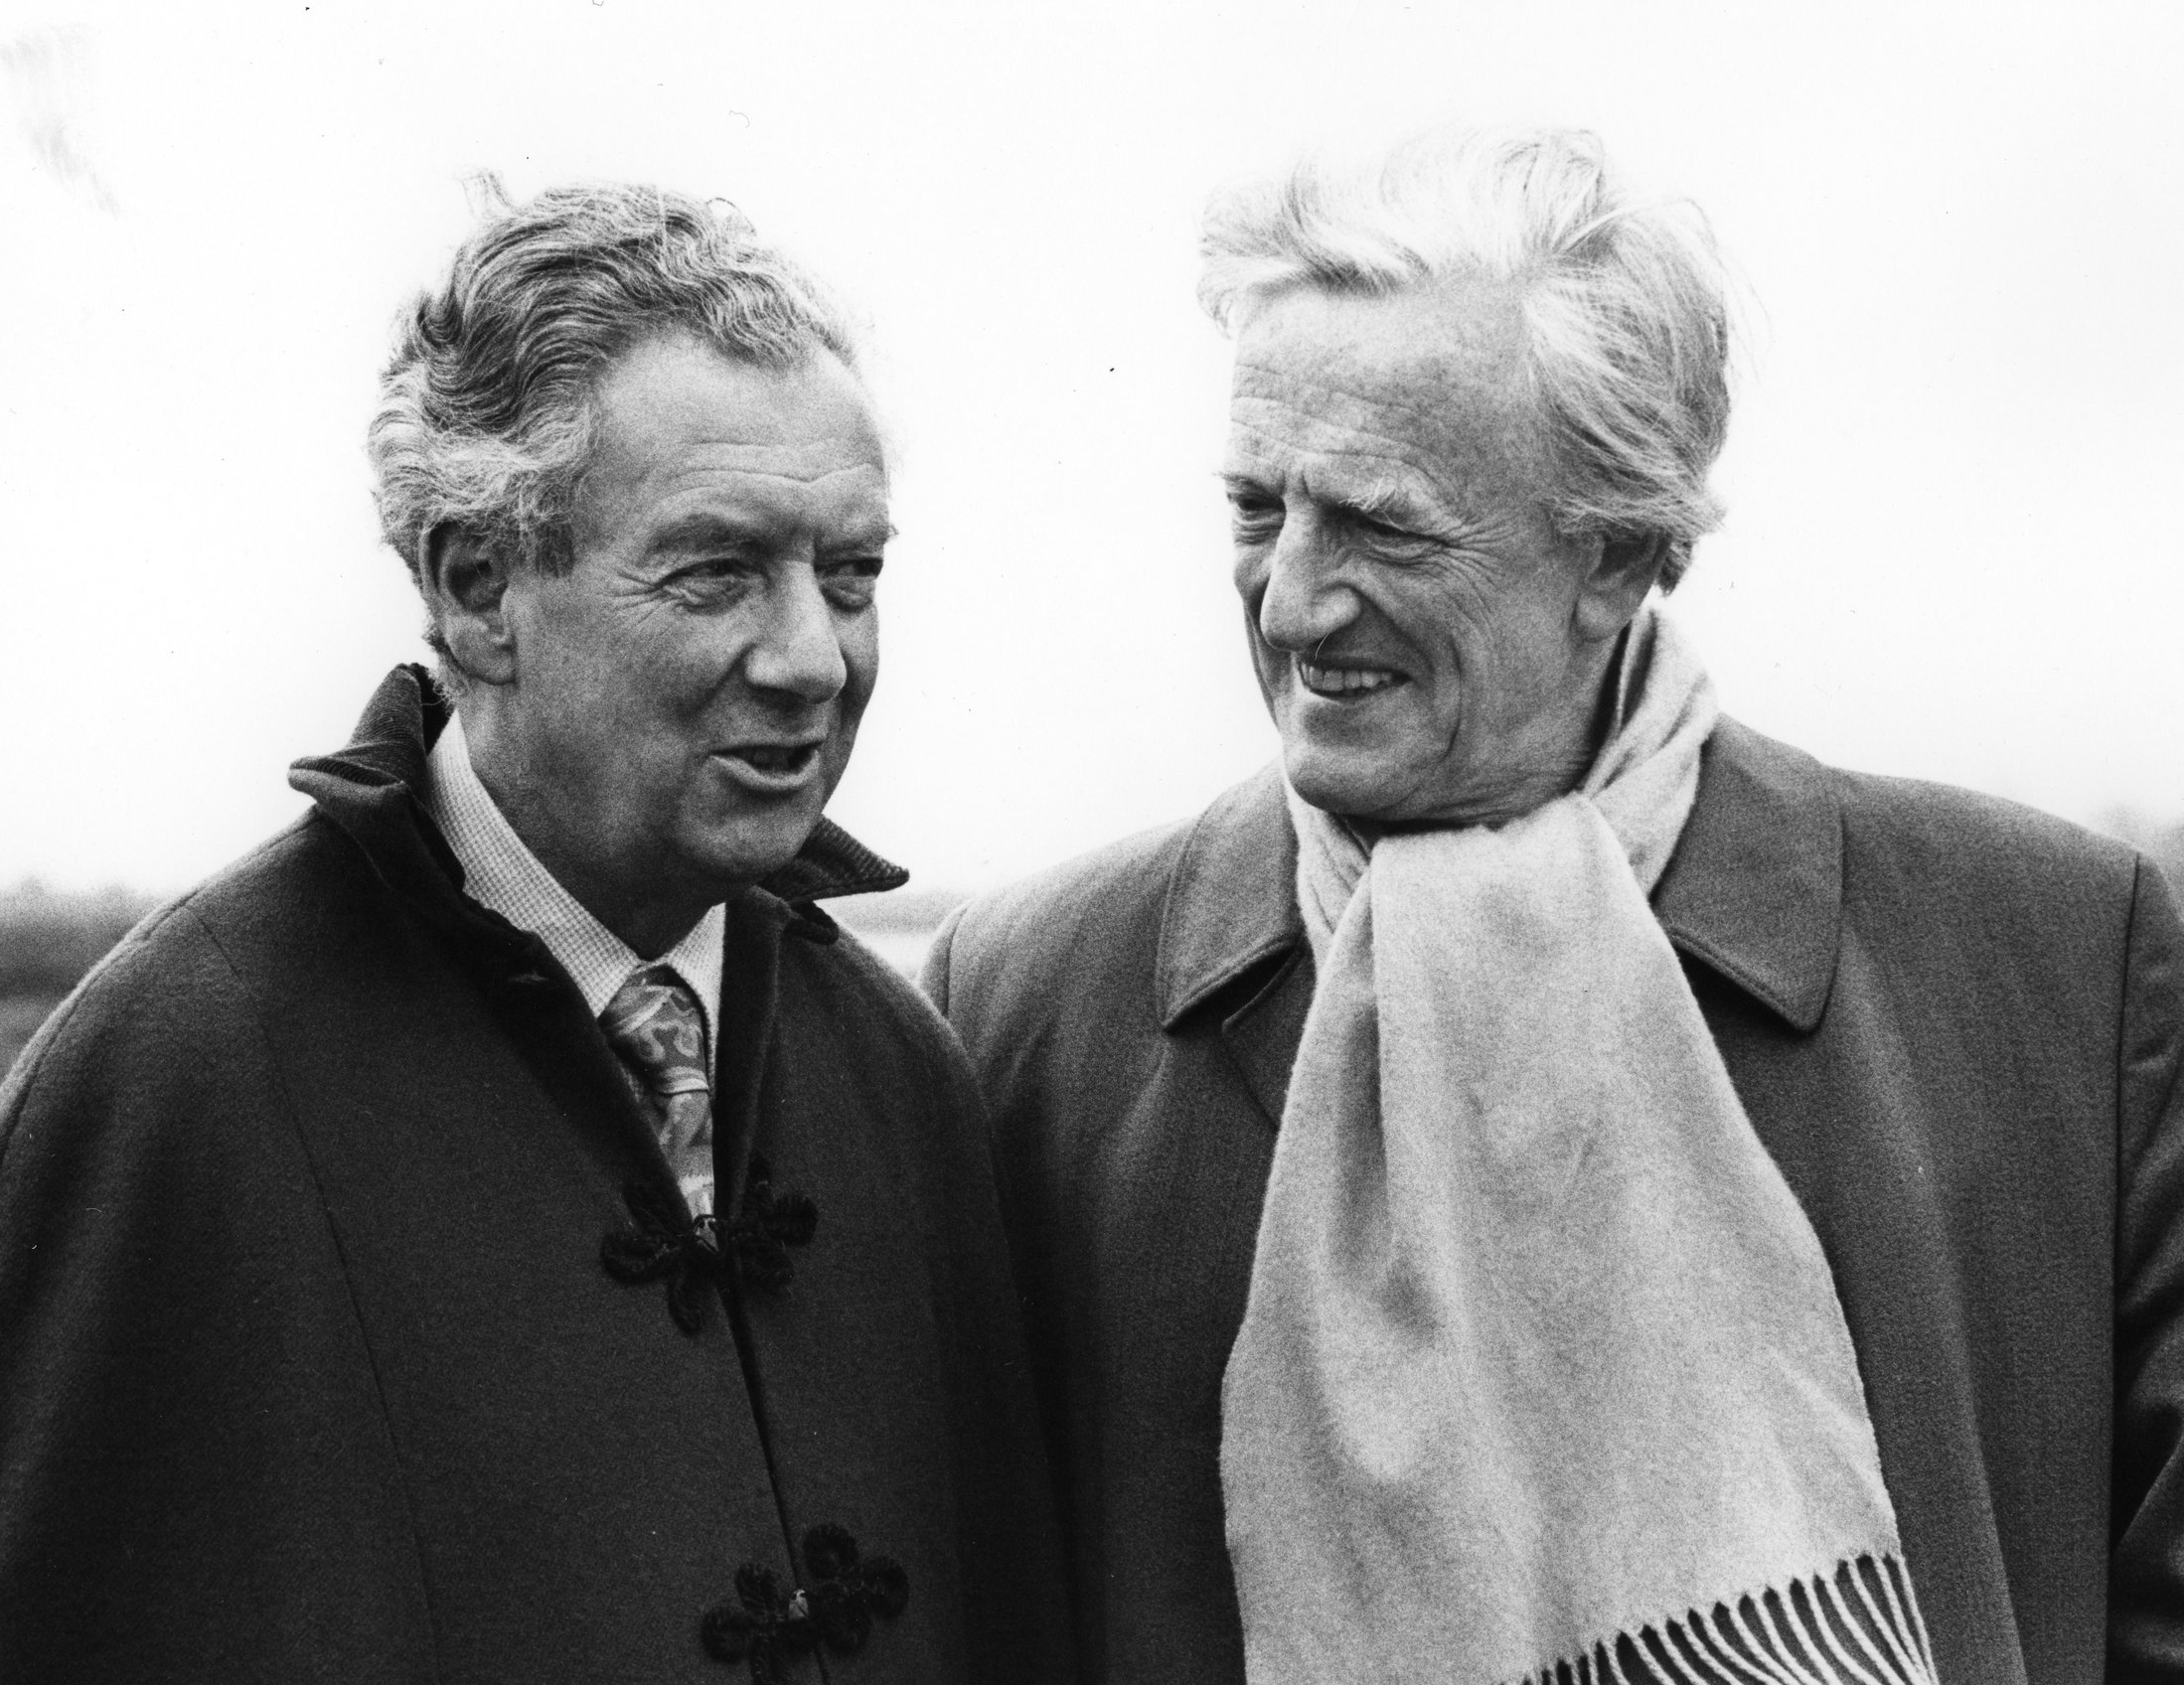  The exhibition   Queer Talk: Homosexuality In Britten’s Britain   profiled the life and creative output of Benjamin Britten, one of the twentieth century’s great composers, during the period of social change that led to the decriminalisation of homo